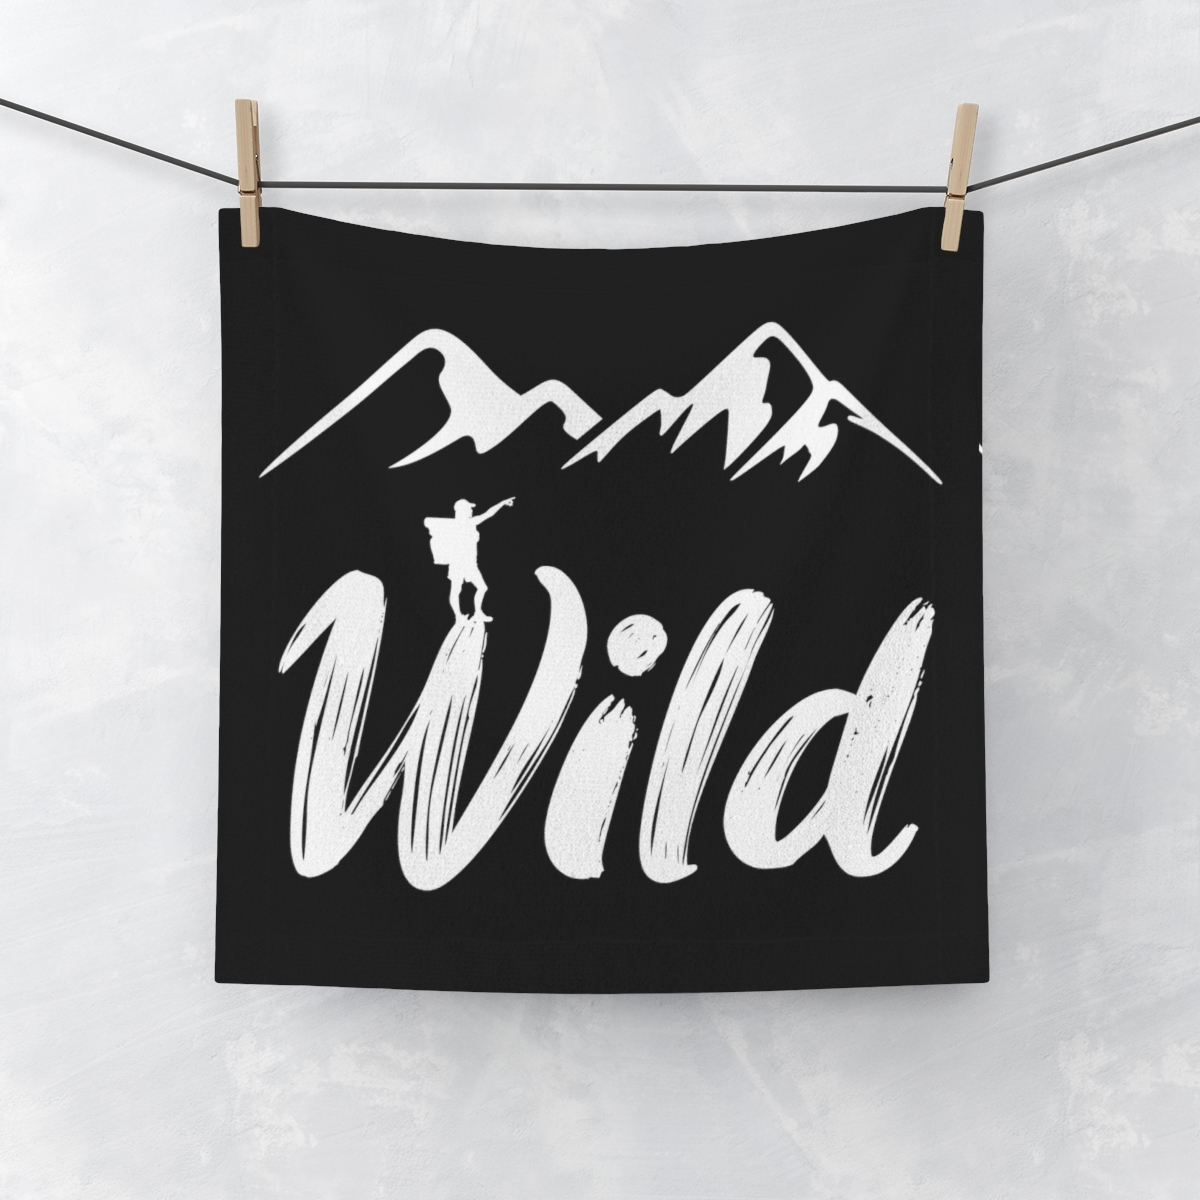 One-Sided Print "Wild" Face Towel 100% Polyester Front 100% Cotton Back - $15.45